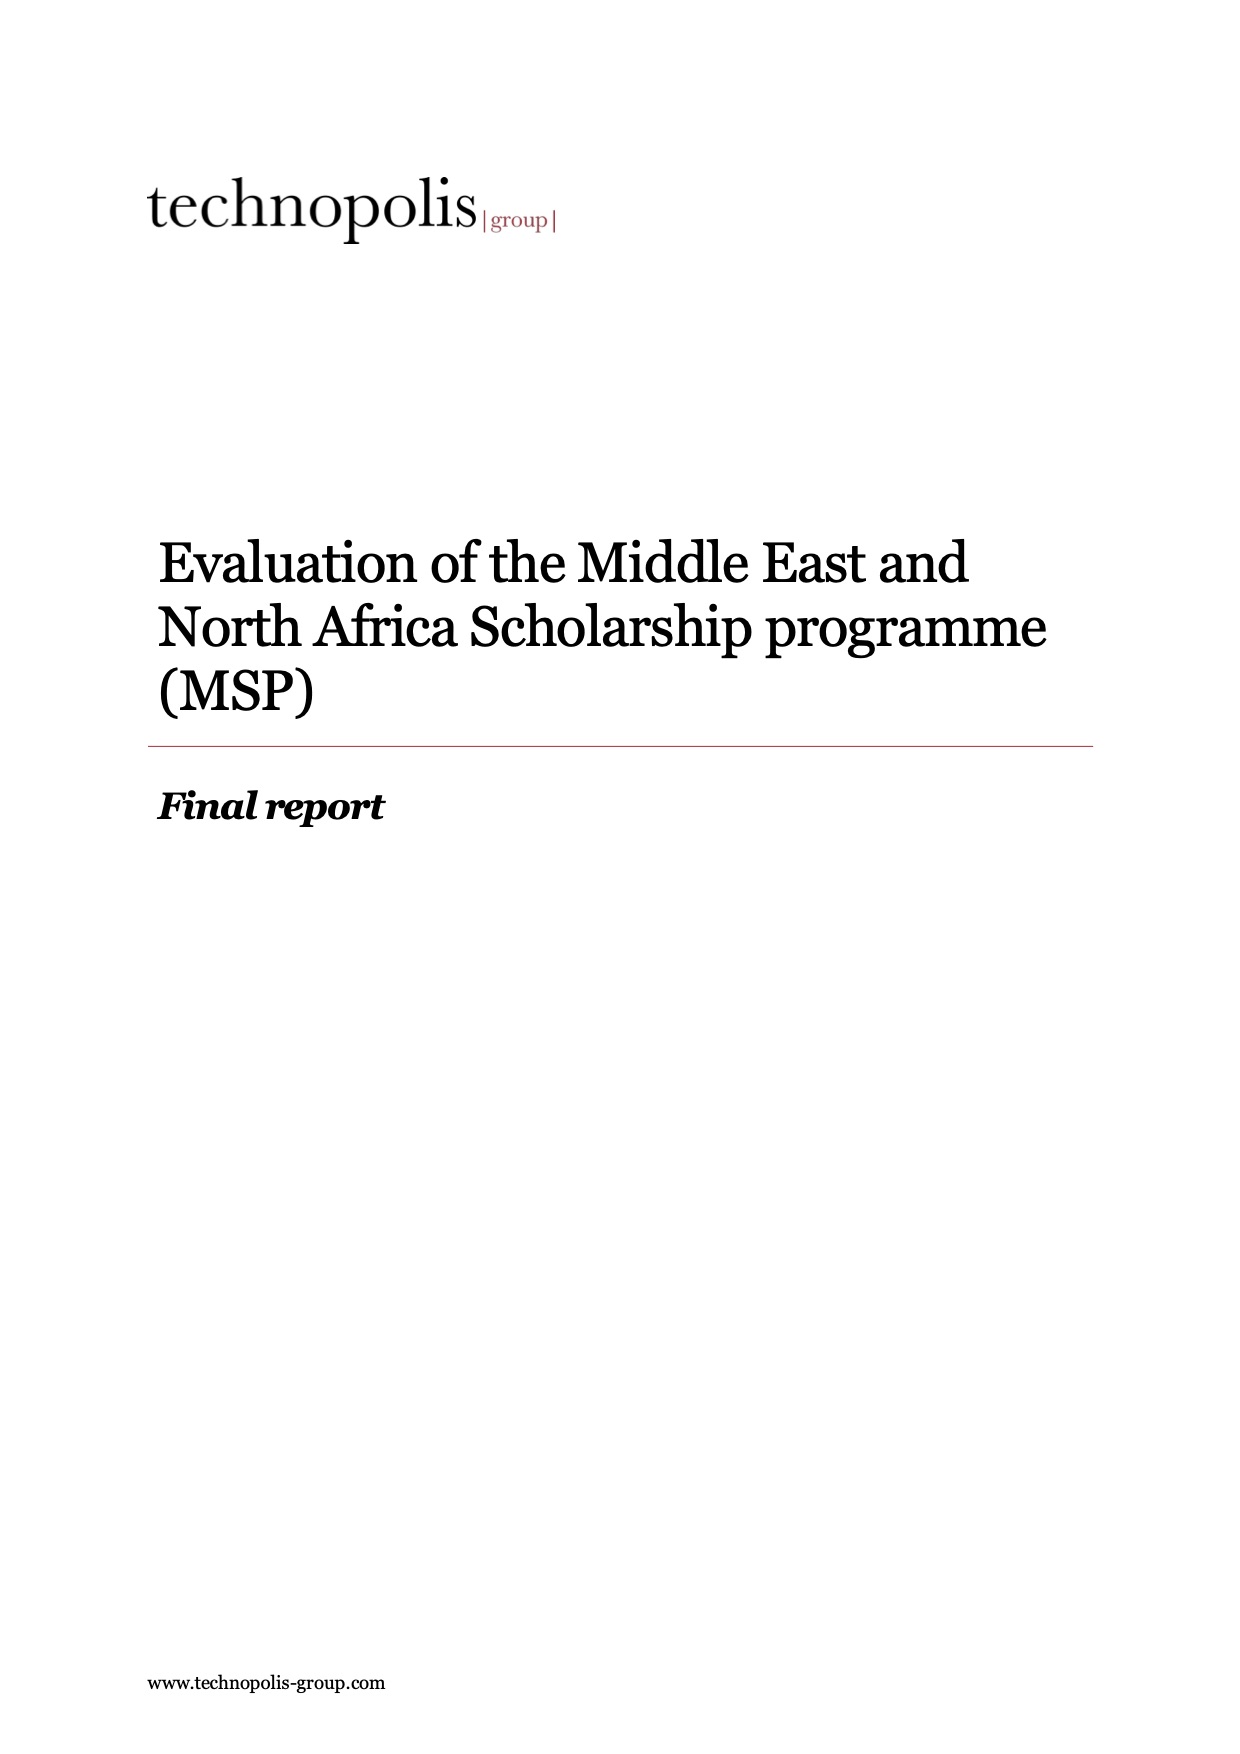 Evaluation of the “Middle East and North Africa Scholarship programme»